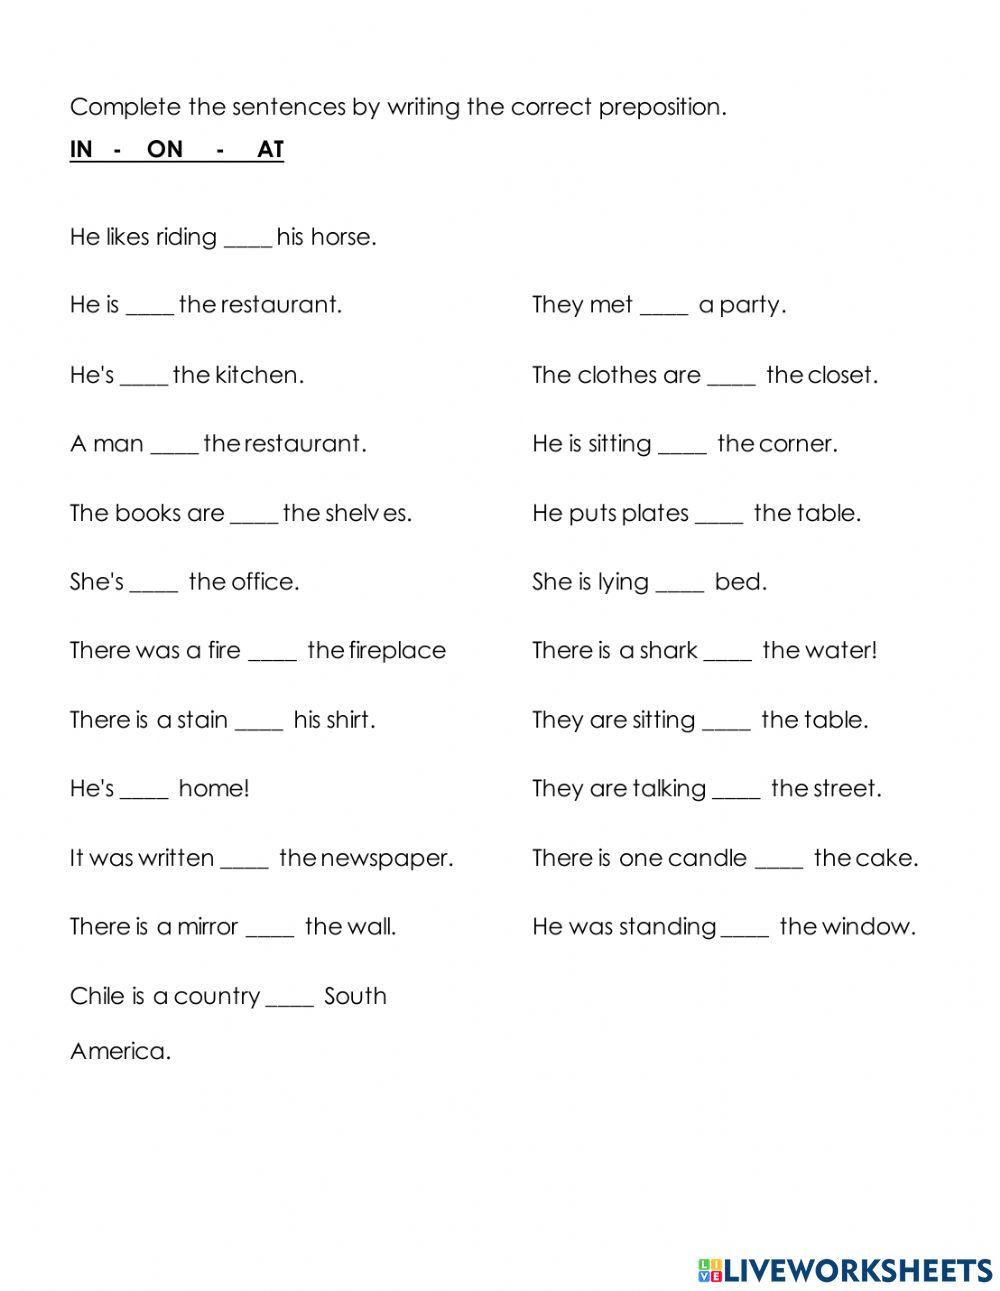 Prepositions in, on, at